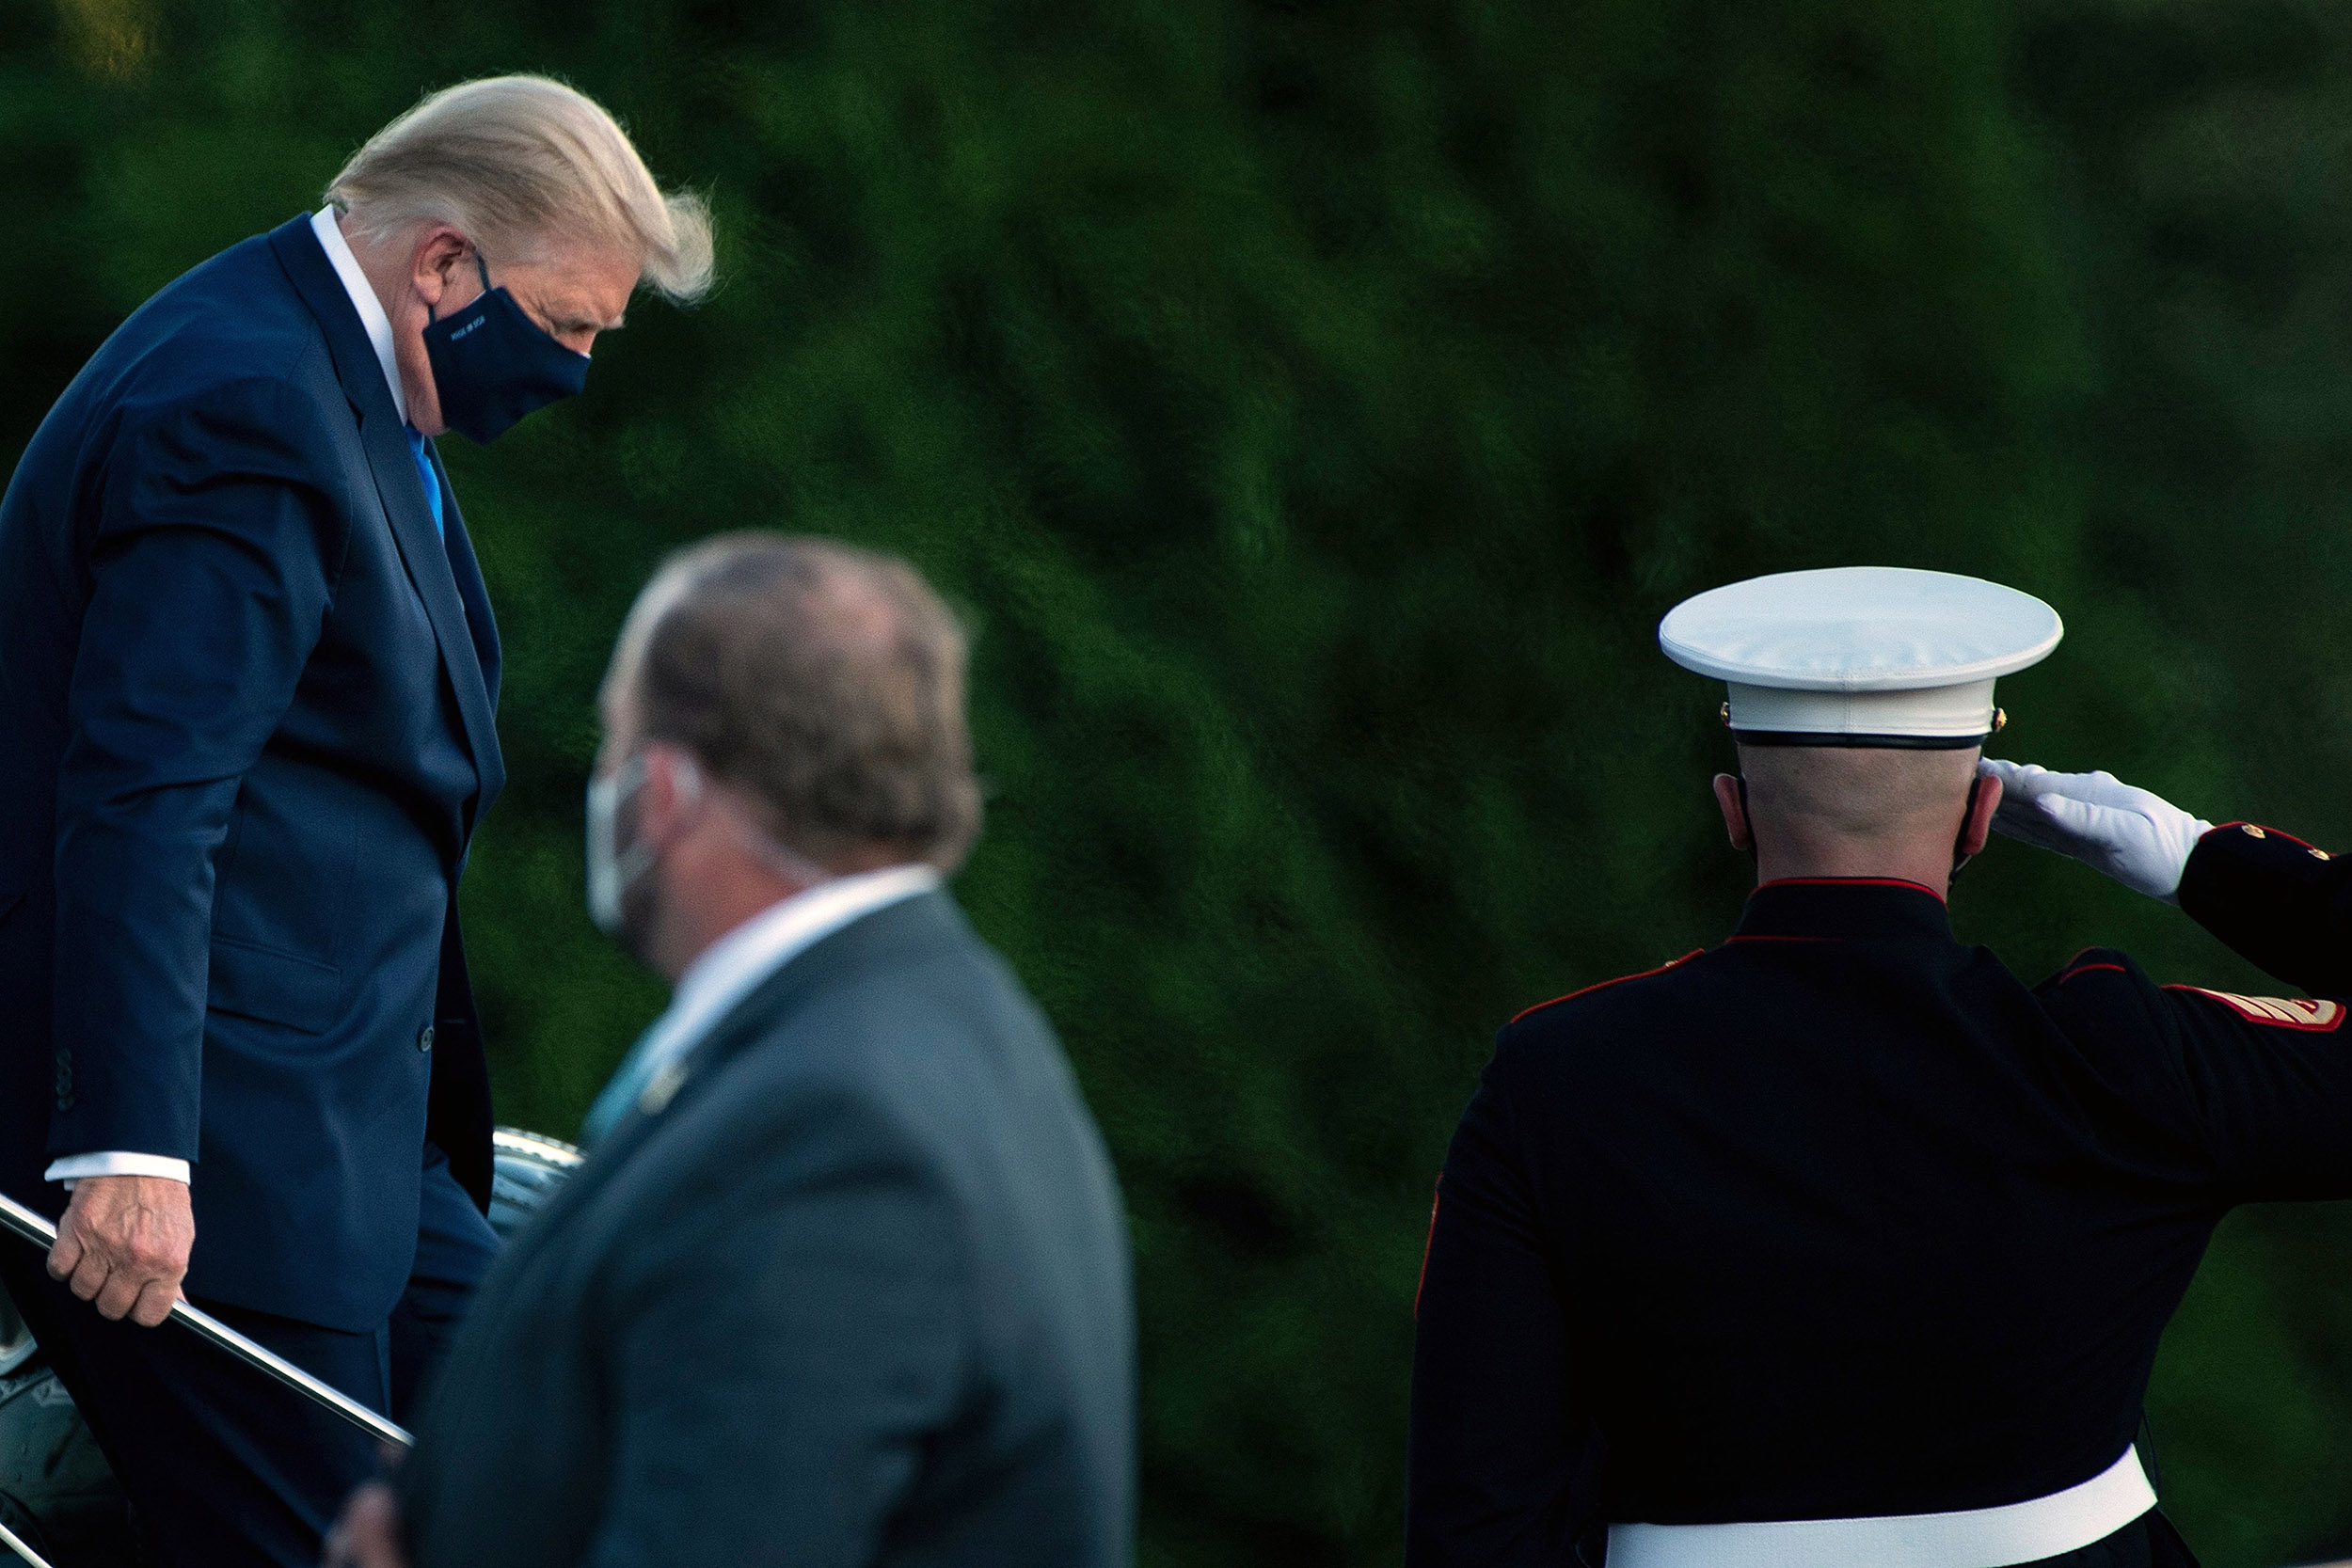 President Donald Trump arrives at Walter Reed Medical Center in Bethesda, Maryland on October 2, after testing positive for COVID-19.